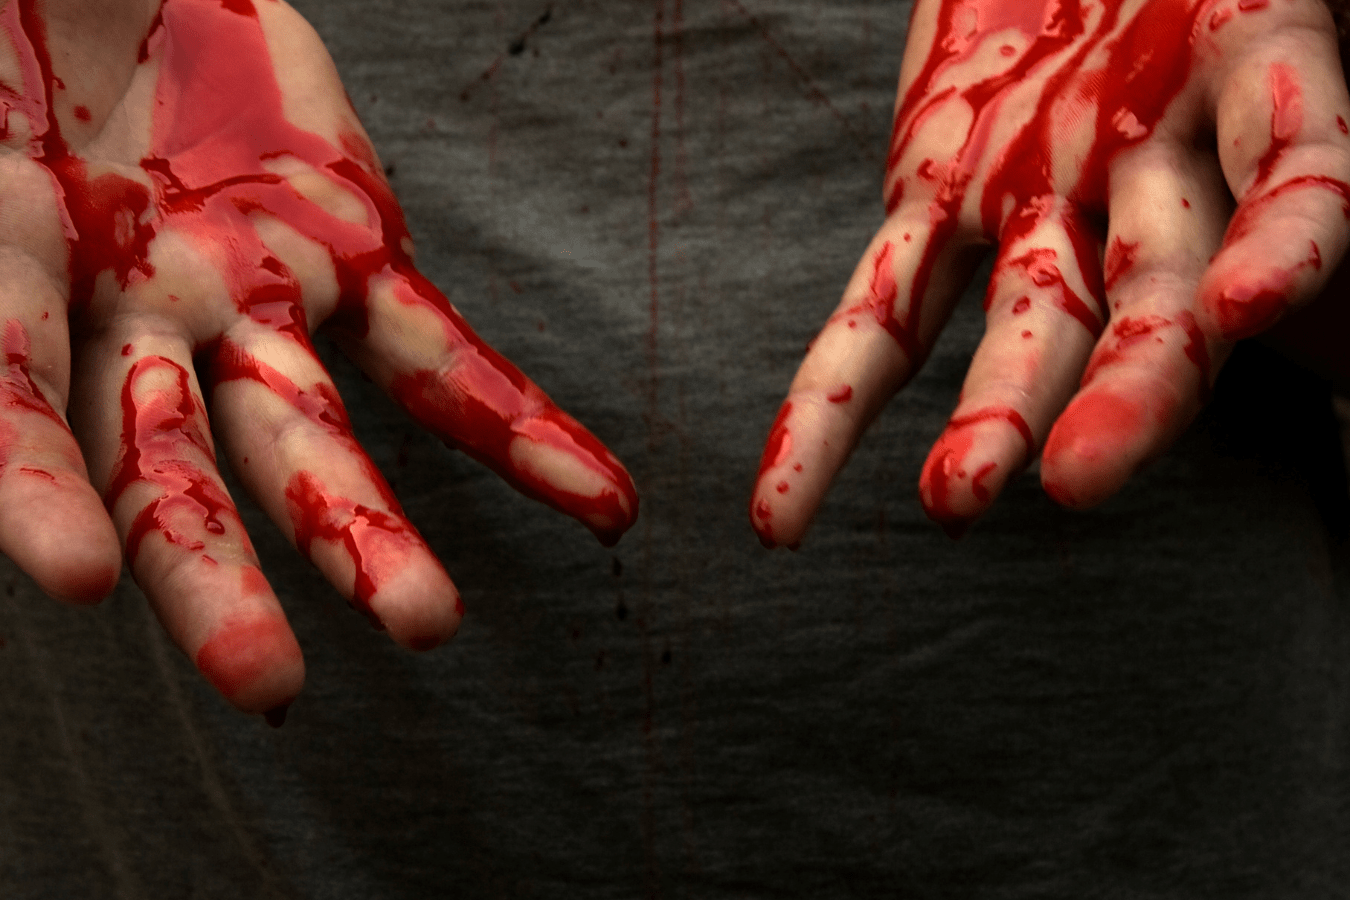 Blood Dream Meaning: Bleeding, Period Blood & More